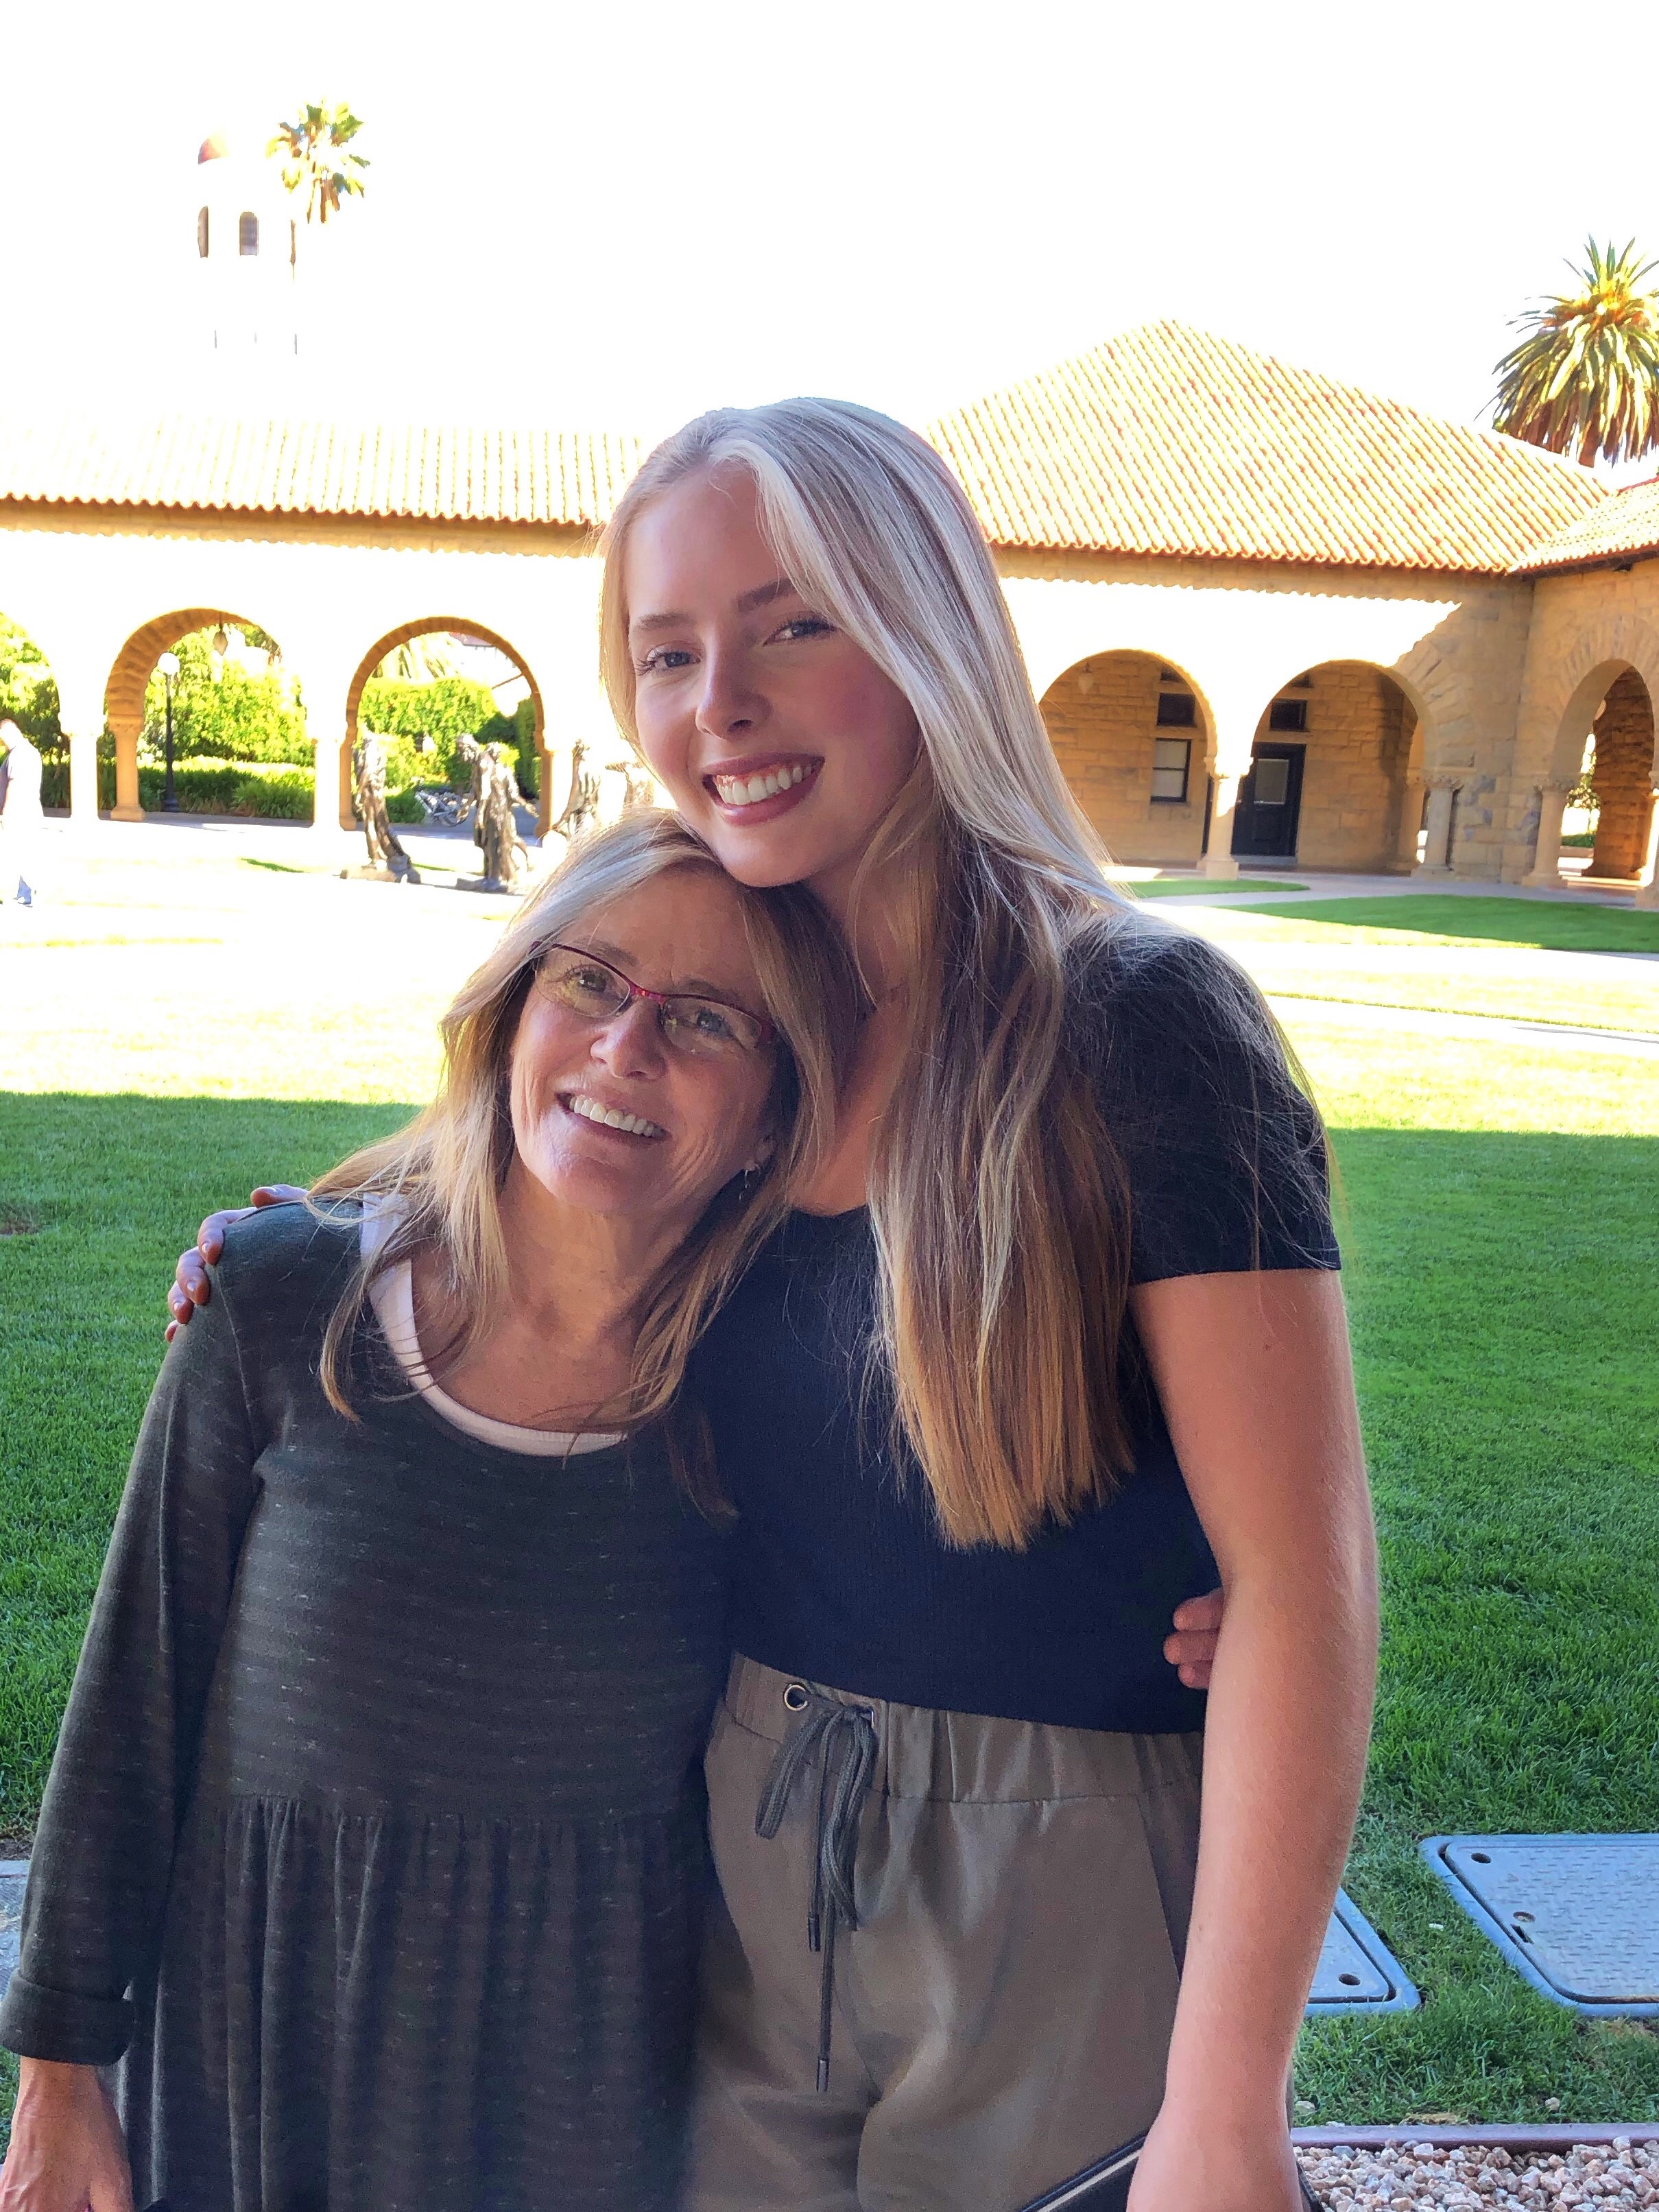 (Left to Right) Brenda and Nora Collins at Stanford University. Brenda said, “The San Francisco hills were tough for me on this trip, but we were so excited to drop Nora off for her freshman year in college.”